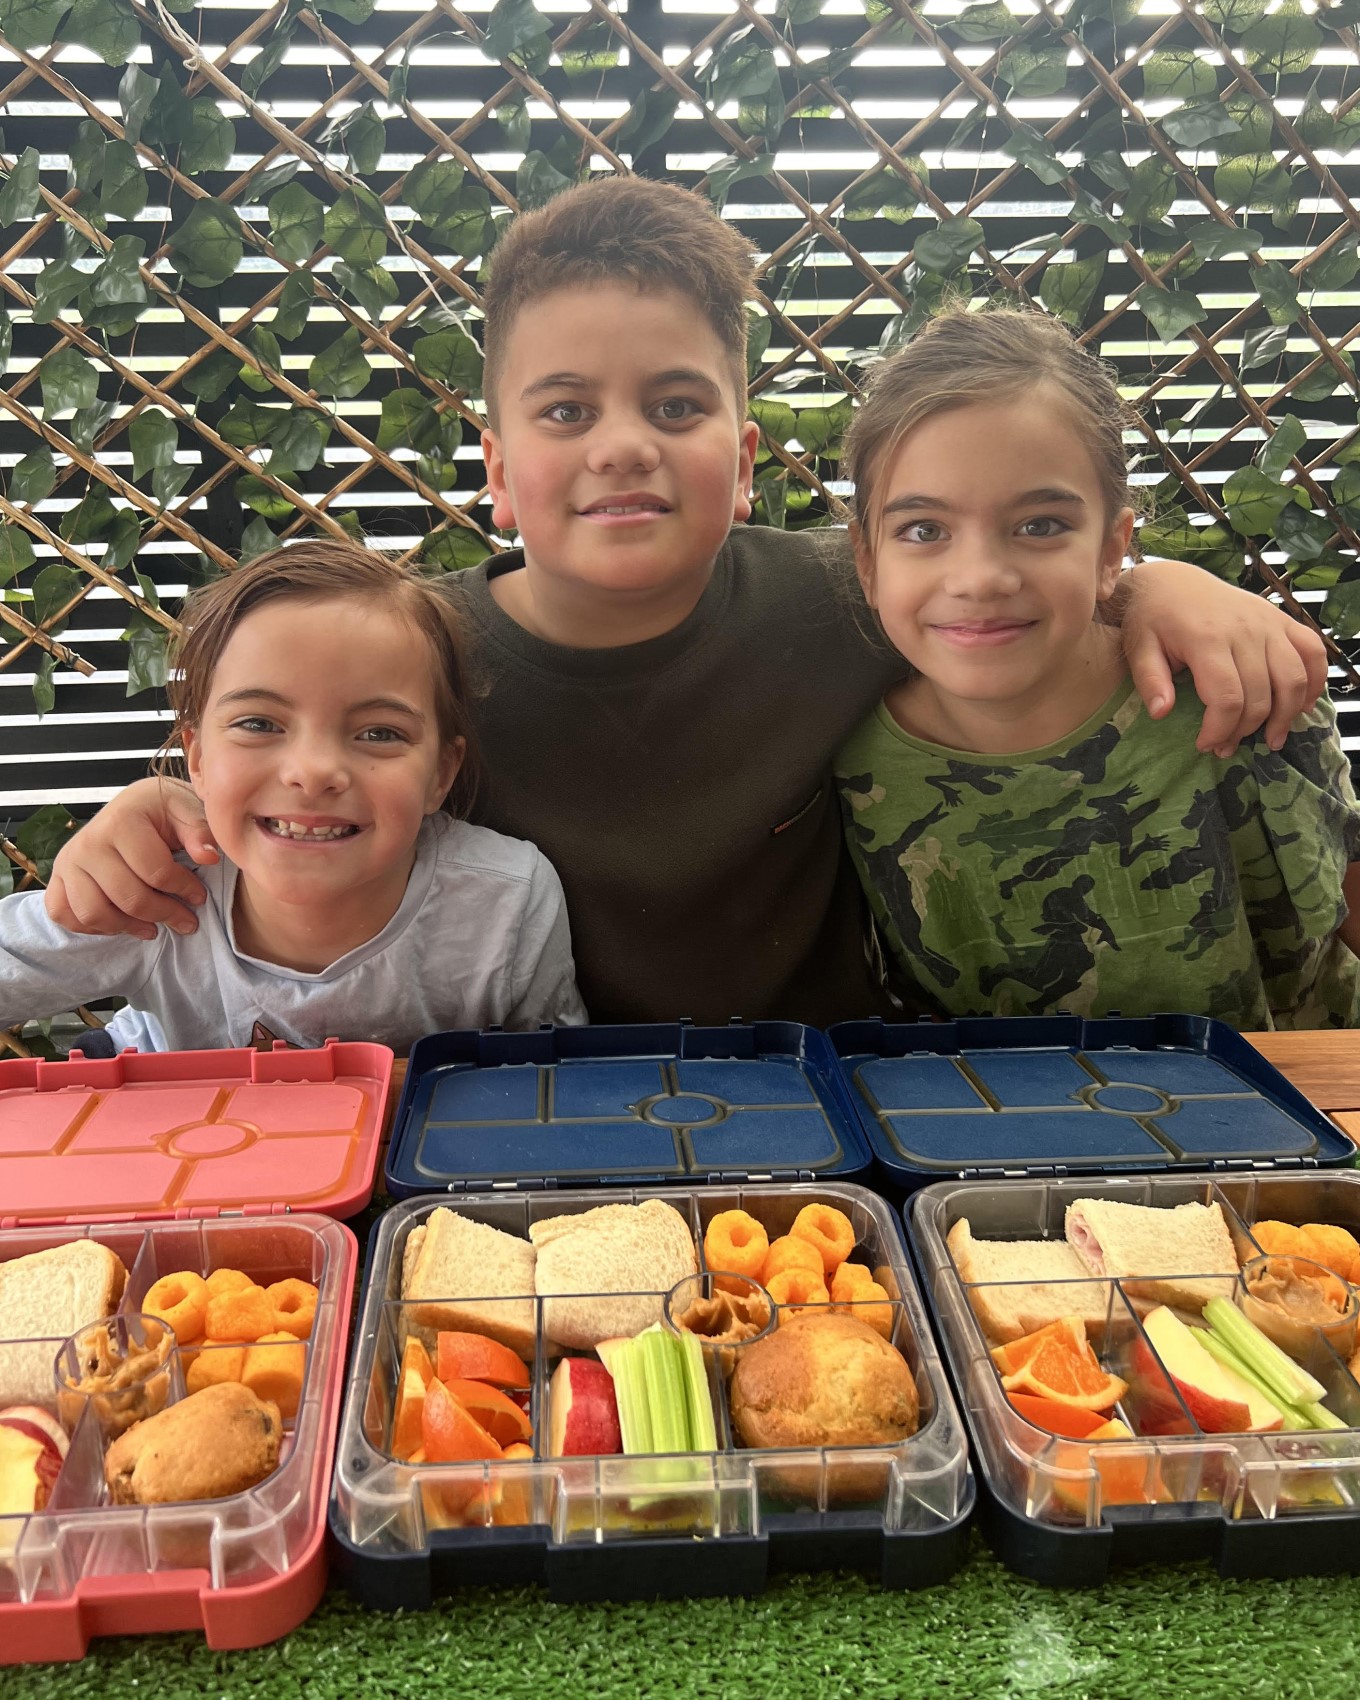 Sustainable-living influencer and Talking Trash Manurewa content creator Bethany Thompson says using bento-style lunch boxes and supplying her kids Mahayla (6), Jaxus (9) and Ilani (7) with pieces of fruit rather than whole pieces helps avoid food waste.